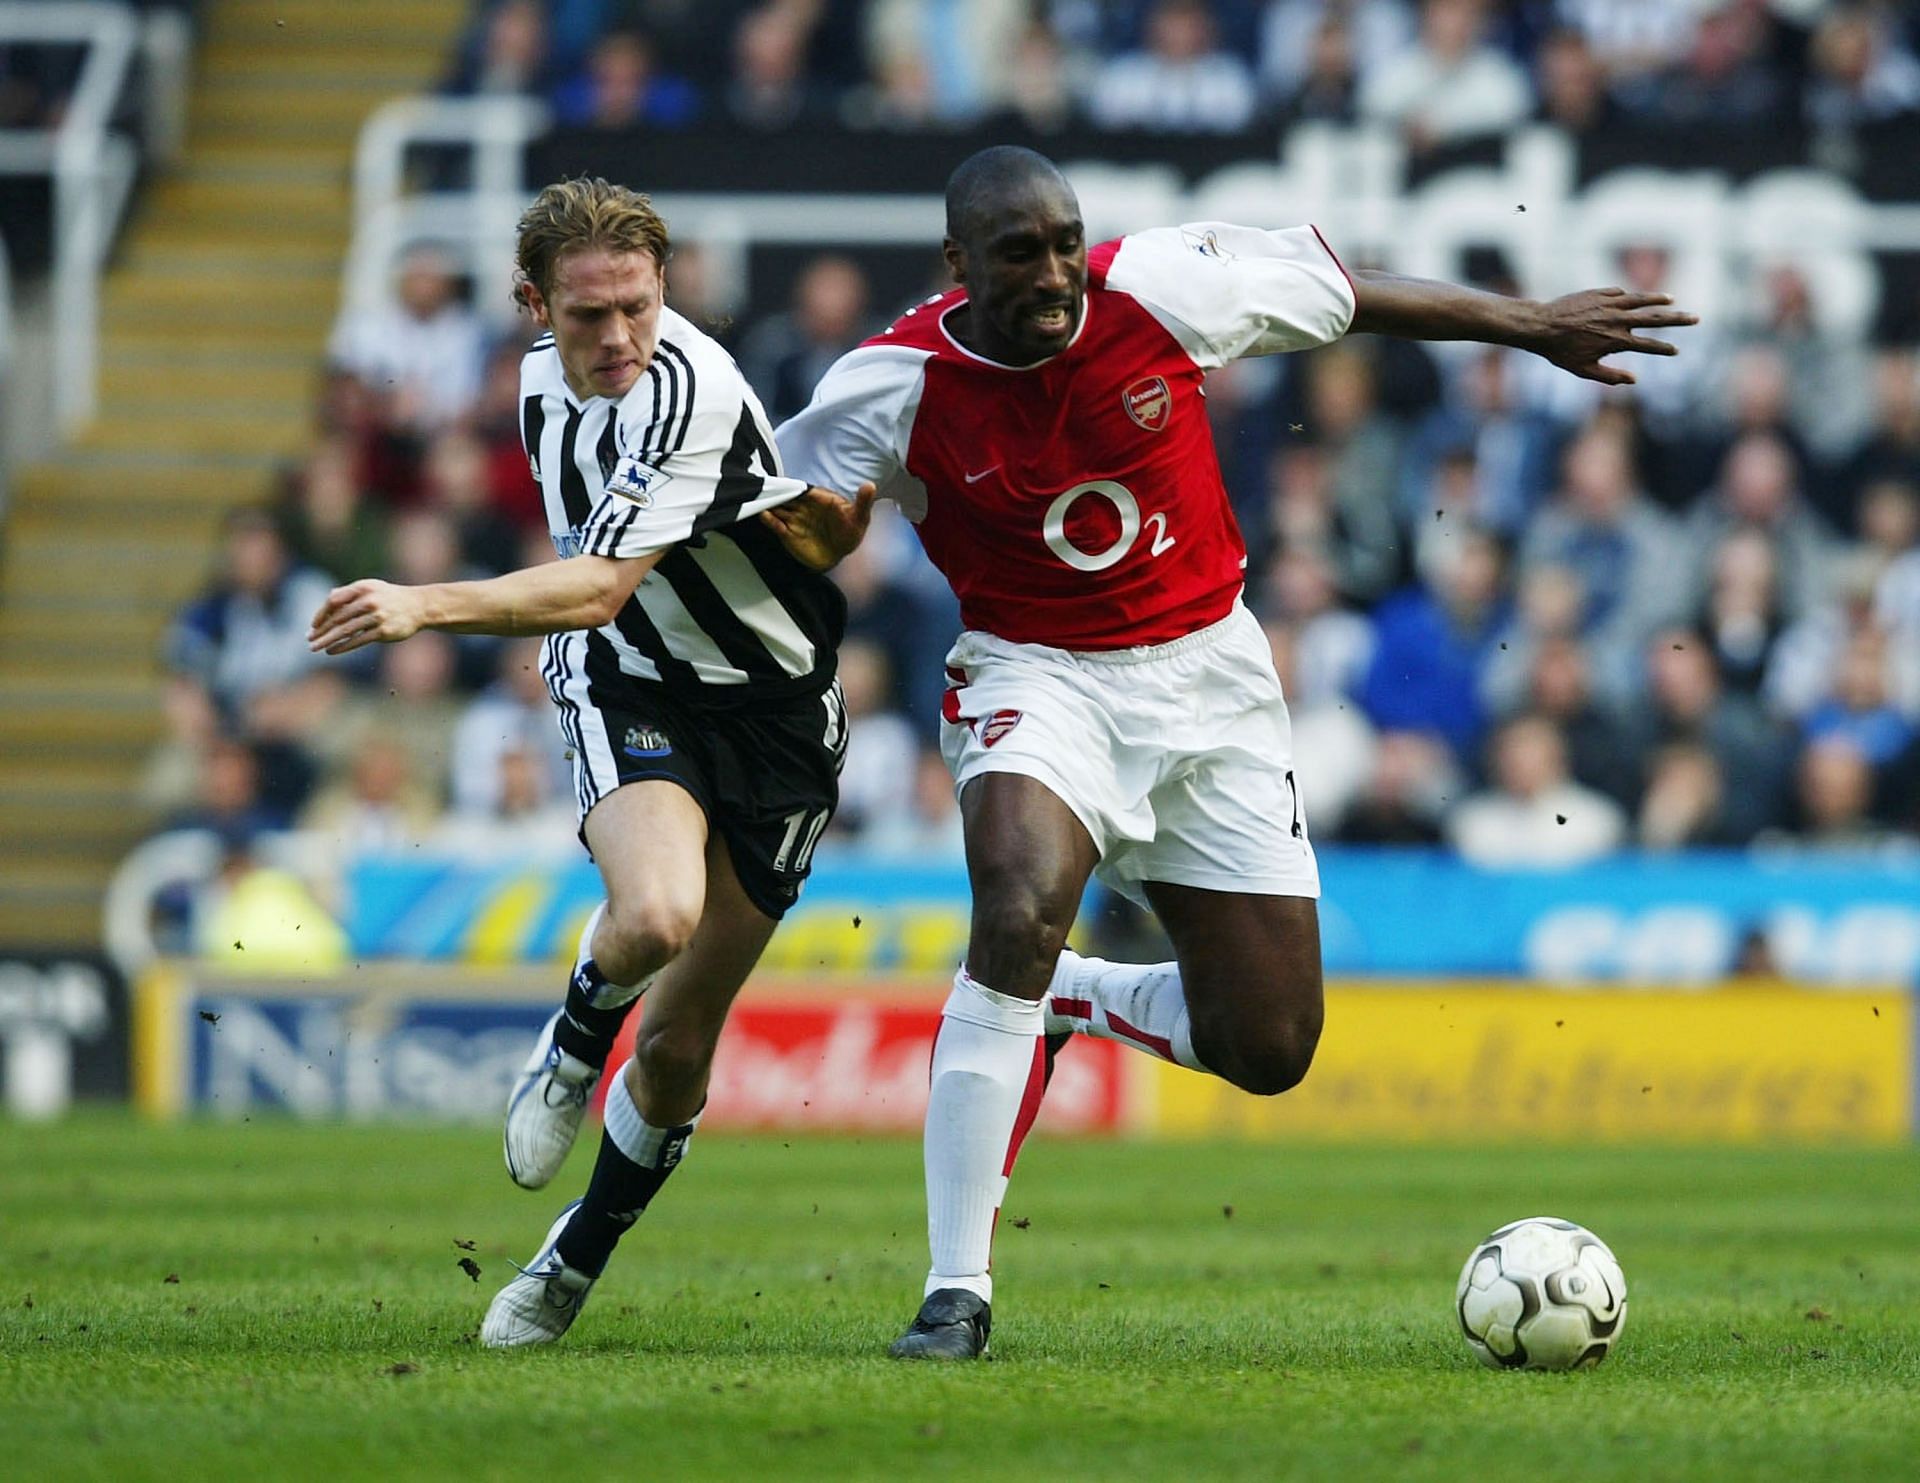 Campbell (right) of Arsenal v Newcastle United